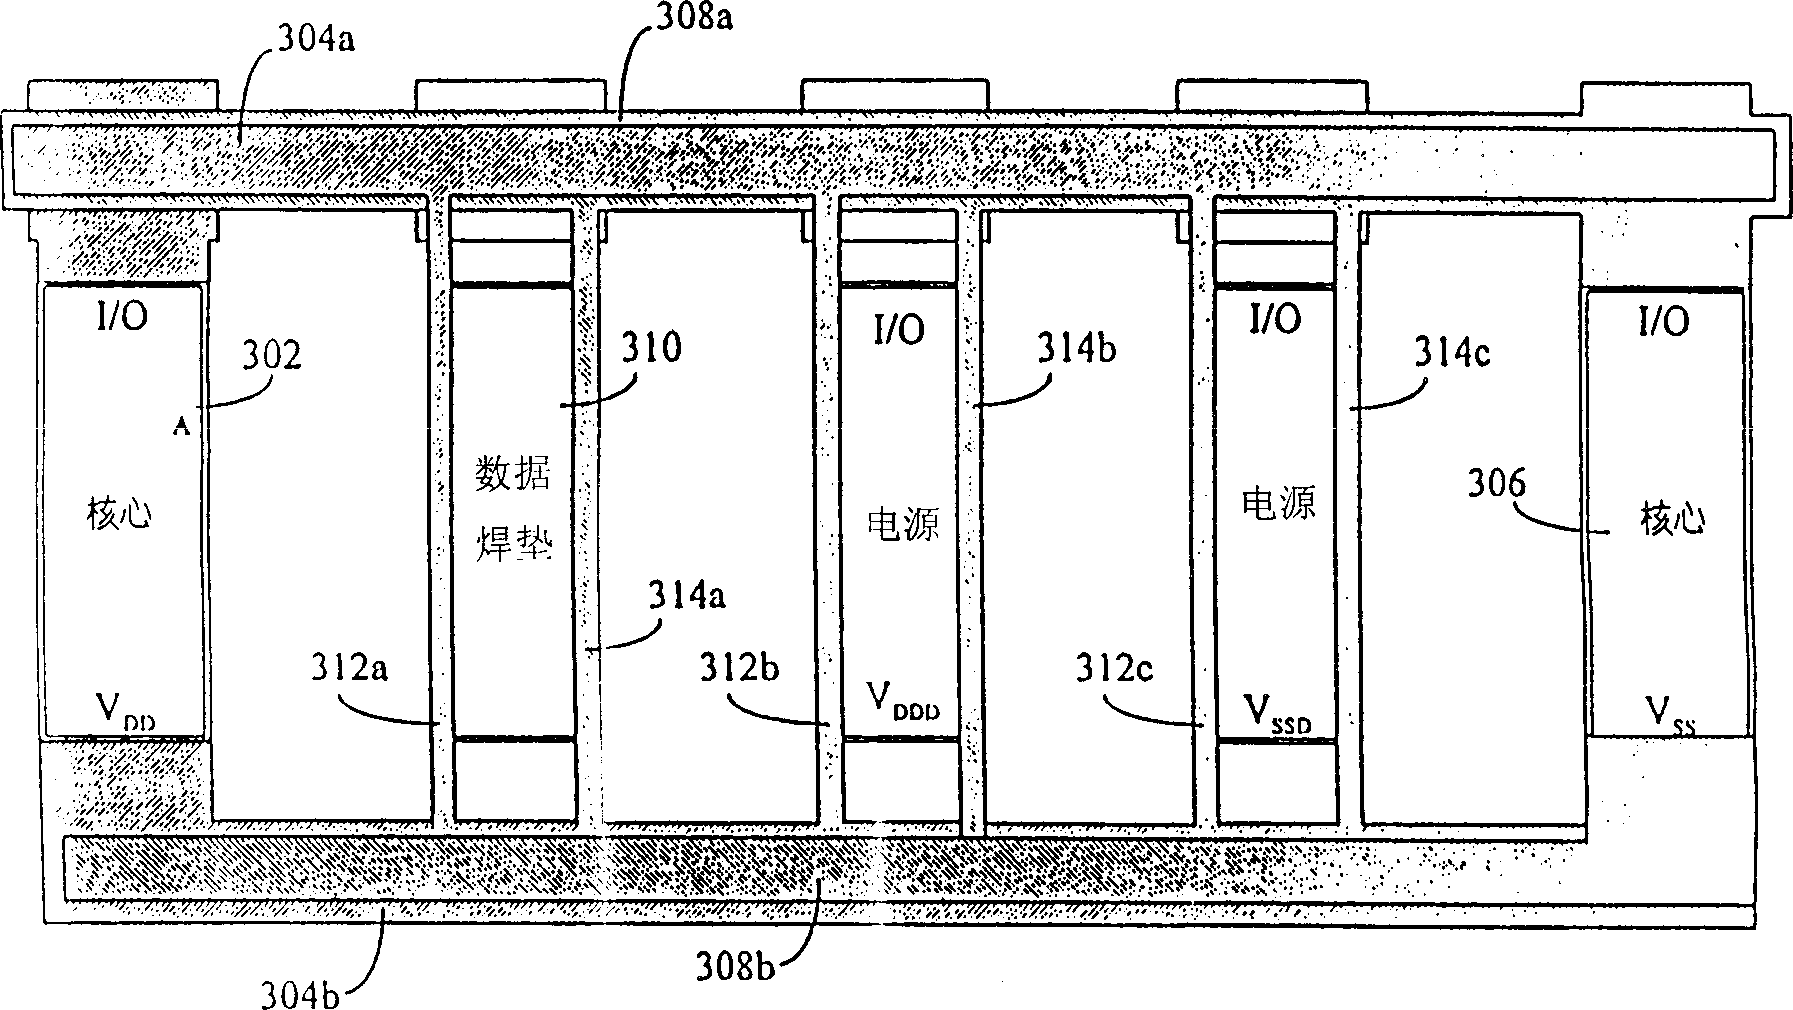 External power supply ring with multiple slender tapes for decreasing voltage drop of integrated circuit